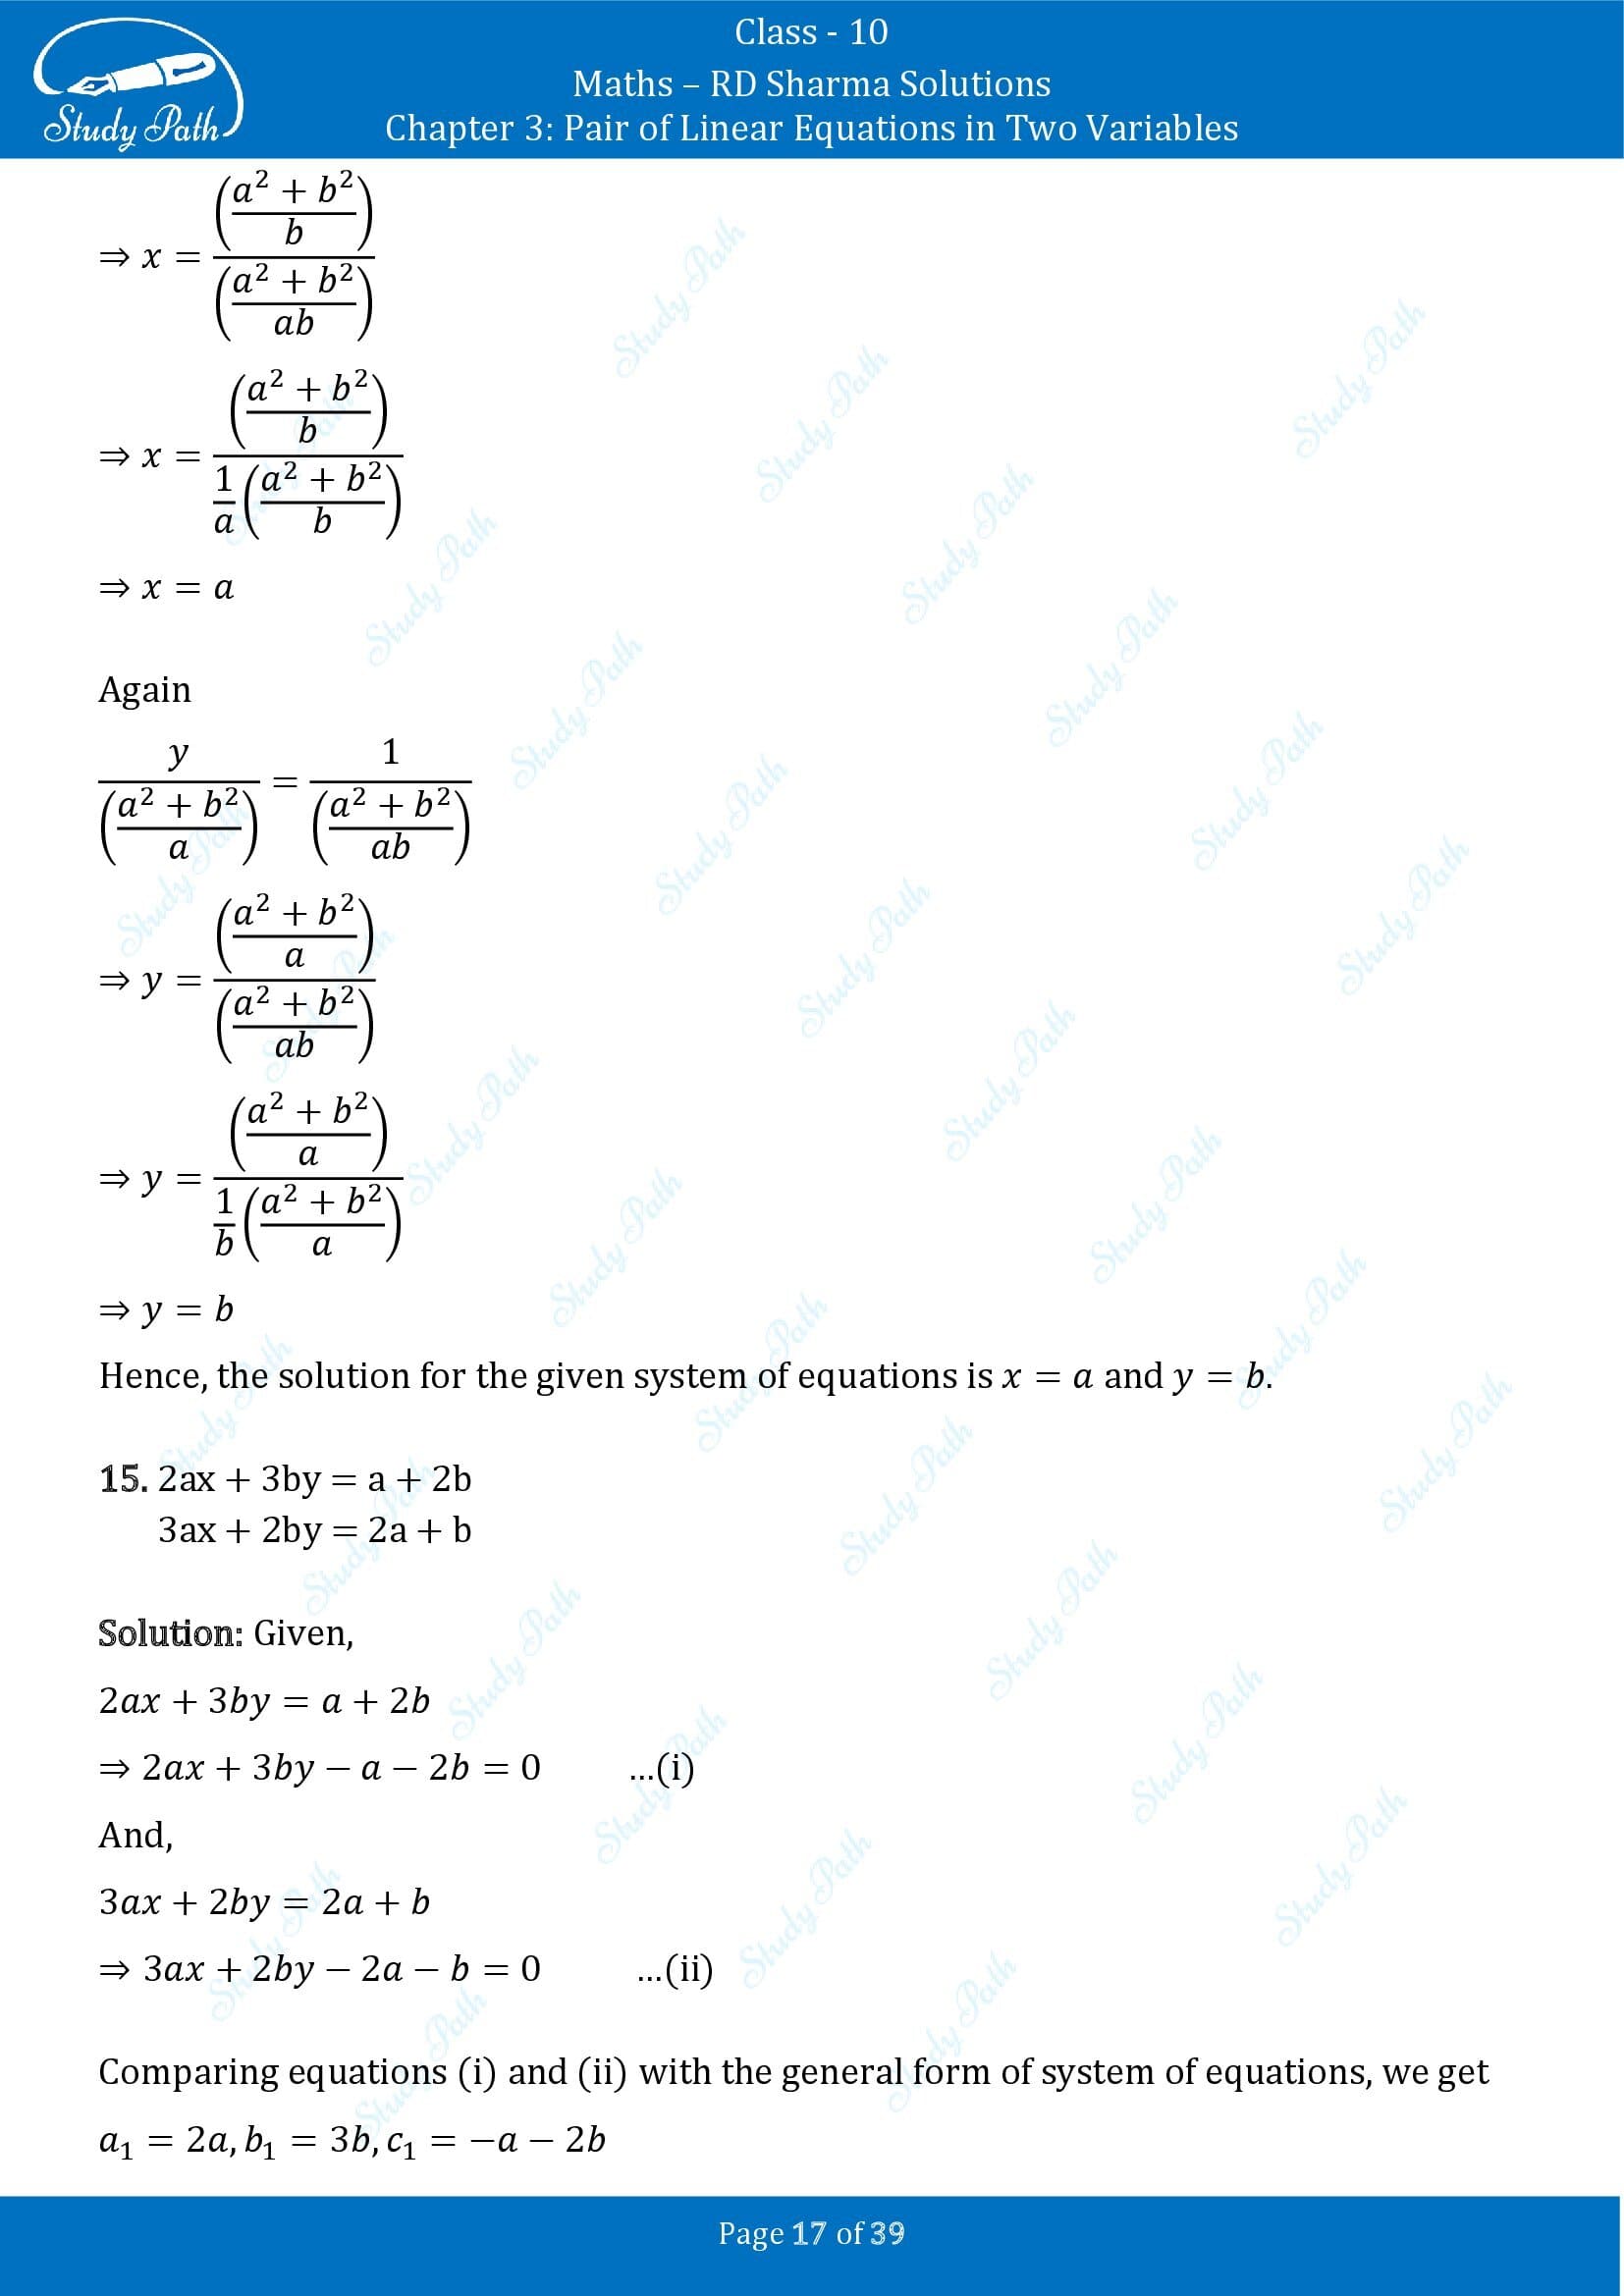 RD Sharma Solutions Class 10 Chapter 3 Pair of Linear Equations in Two Variables Exercise 3.4 00017